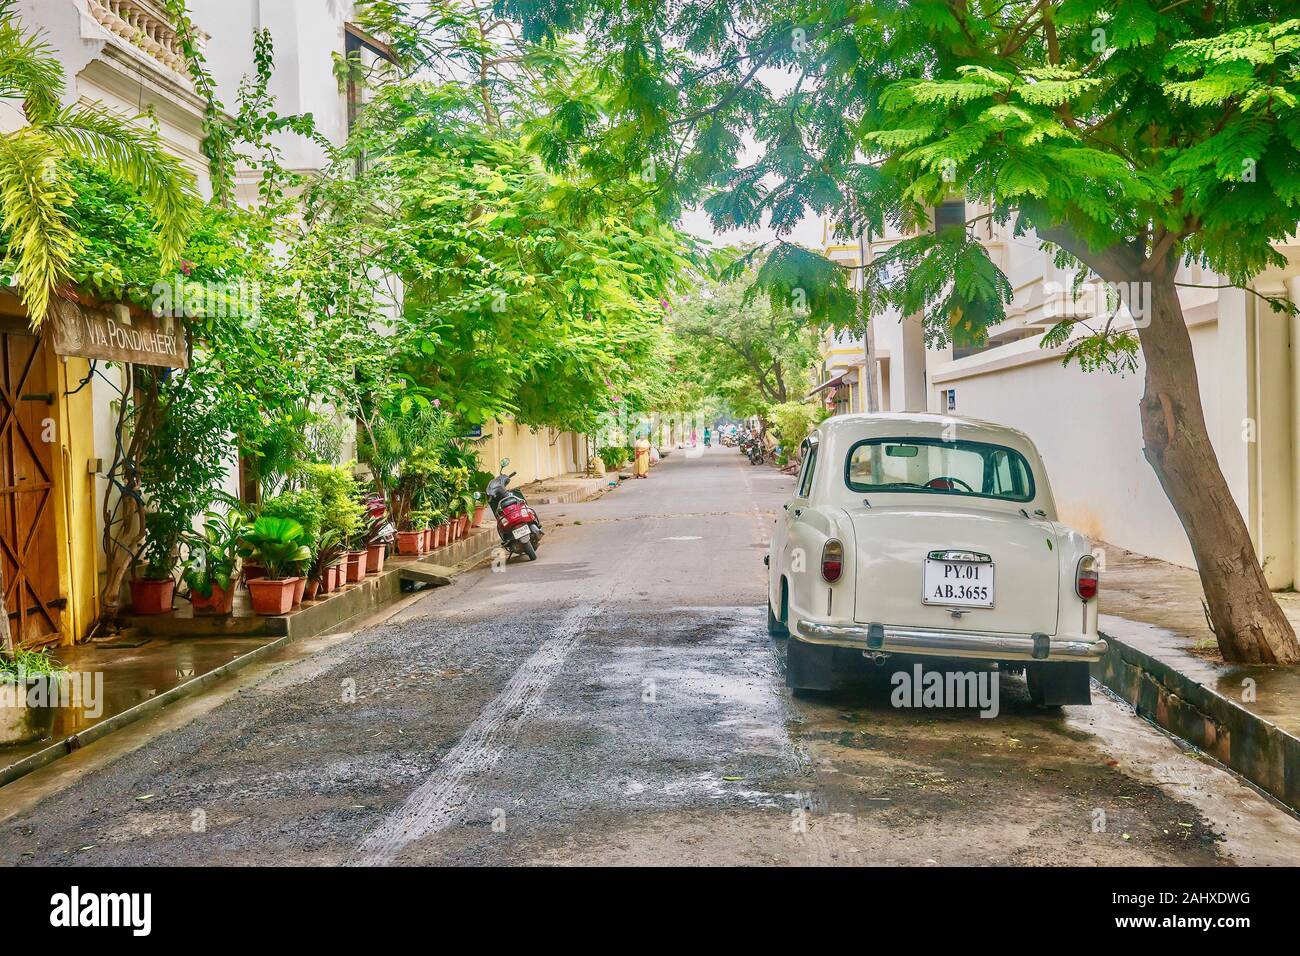 Puducherry, India - December 9, 2013. A beige vintage Ambassador car is parked on a street in the White Town area of the former French colonial town. Stock Photo